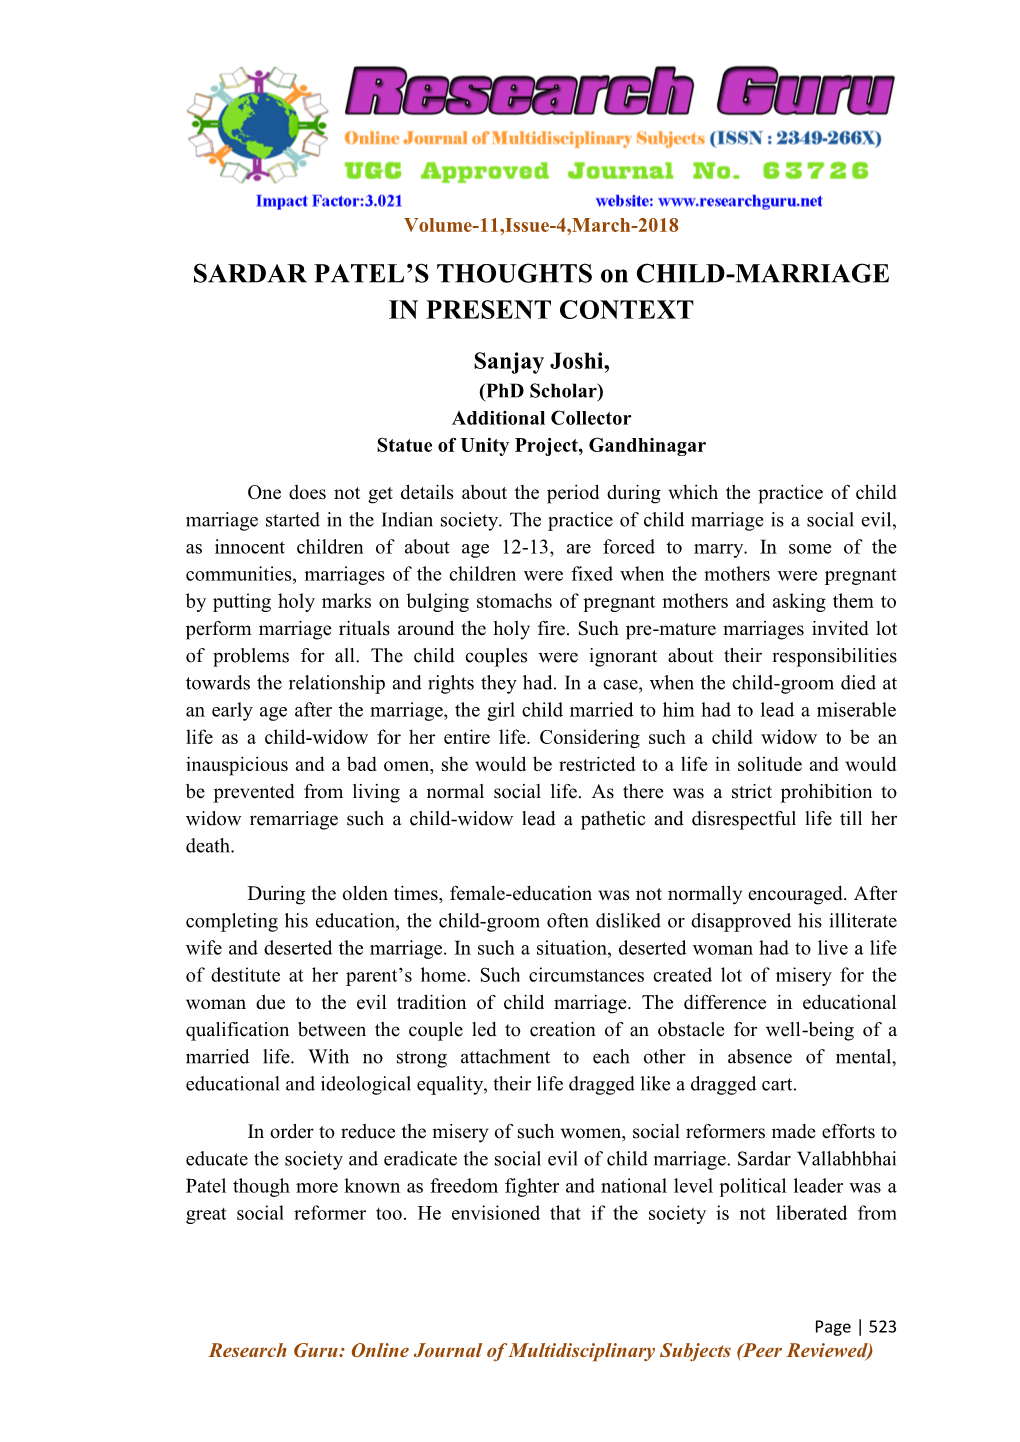 SARDAR PATEL's THOUGHTS on CHILD-MARRIAGE in PRESENT CONTEXT